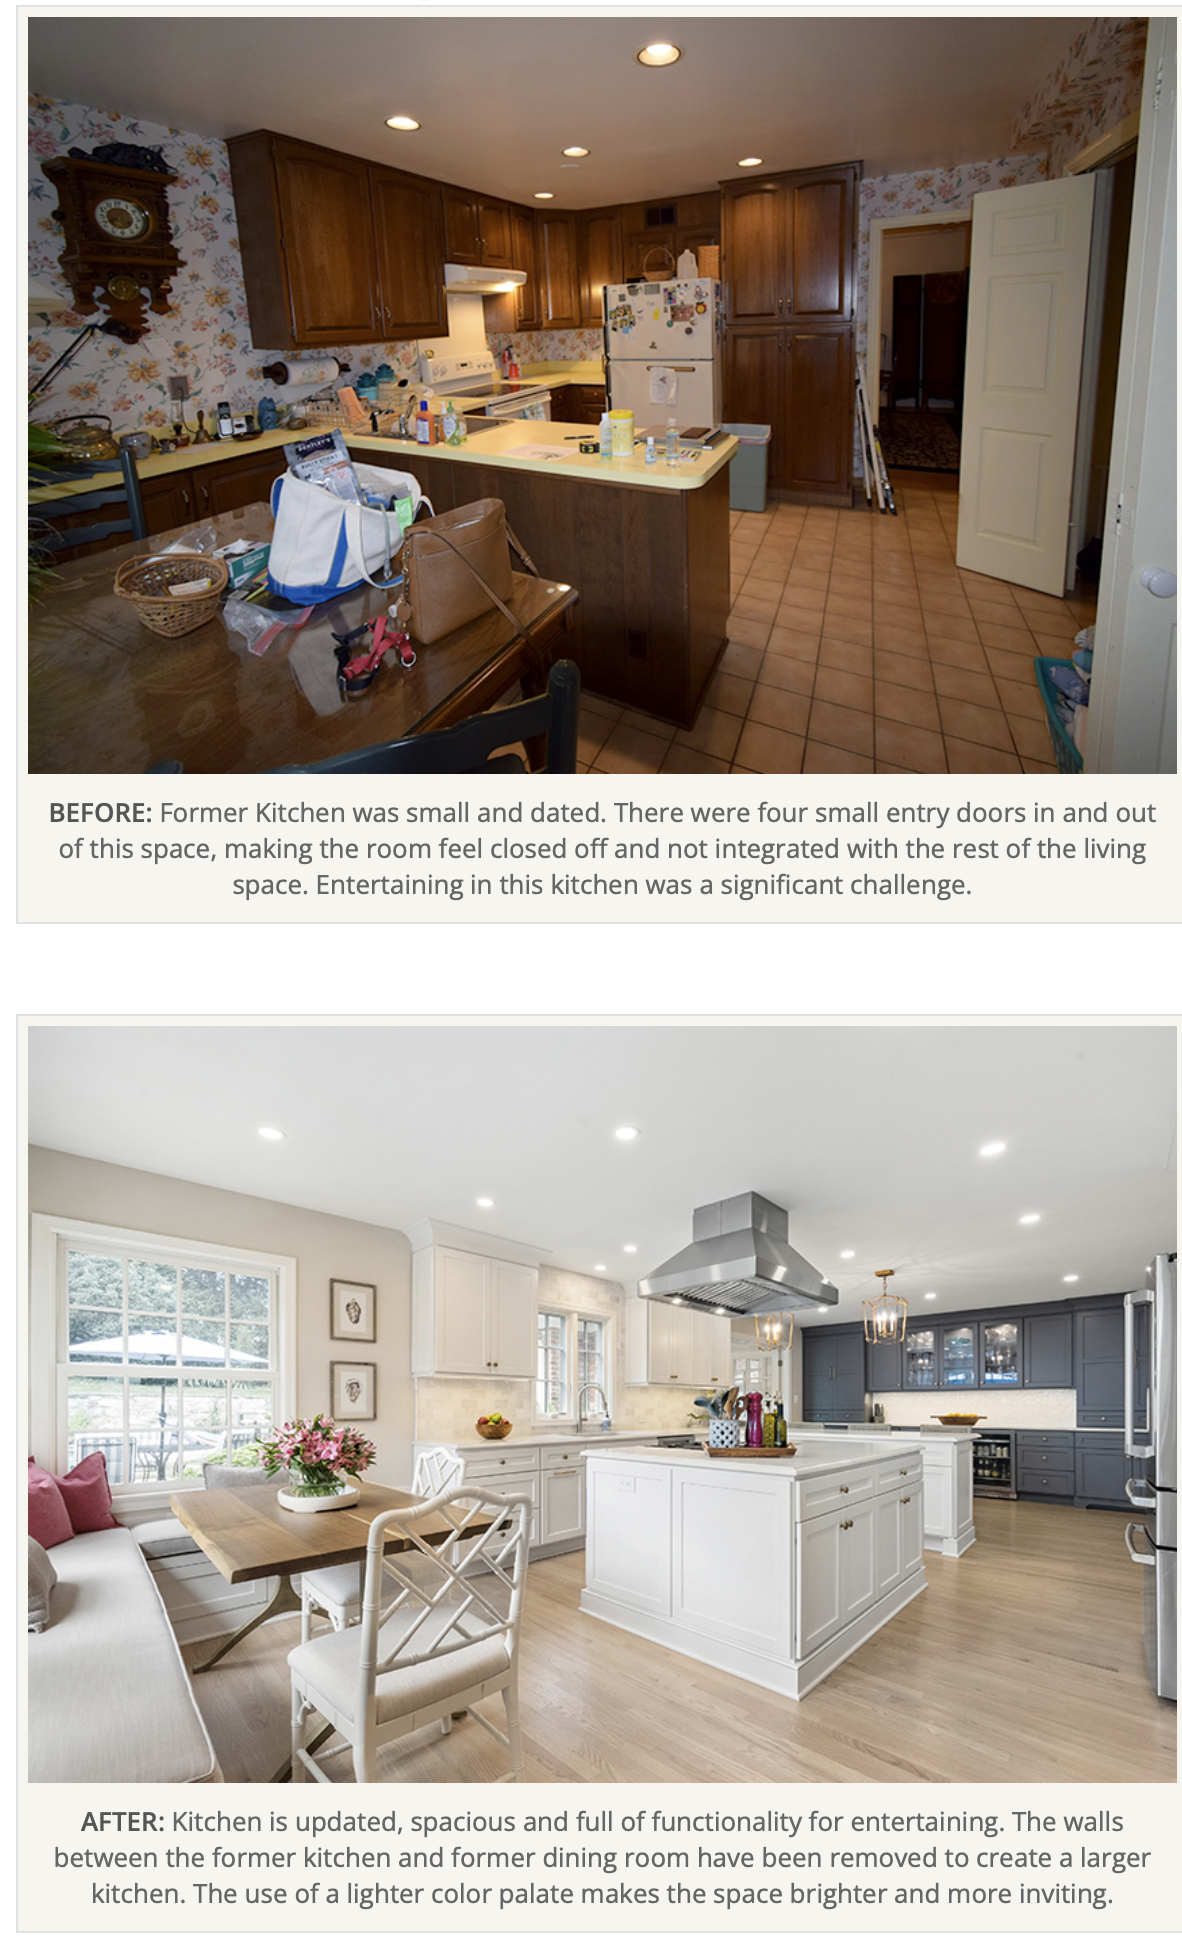 Renovation Project Profile: Mclean VA Kitchen Renovation - As Seen in Home & Design Magazine. Before - After